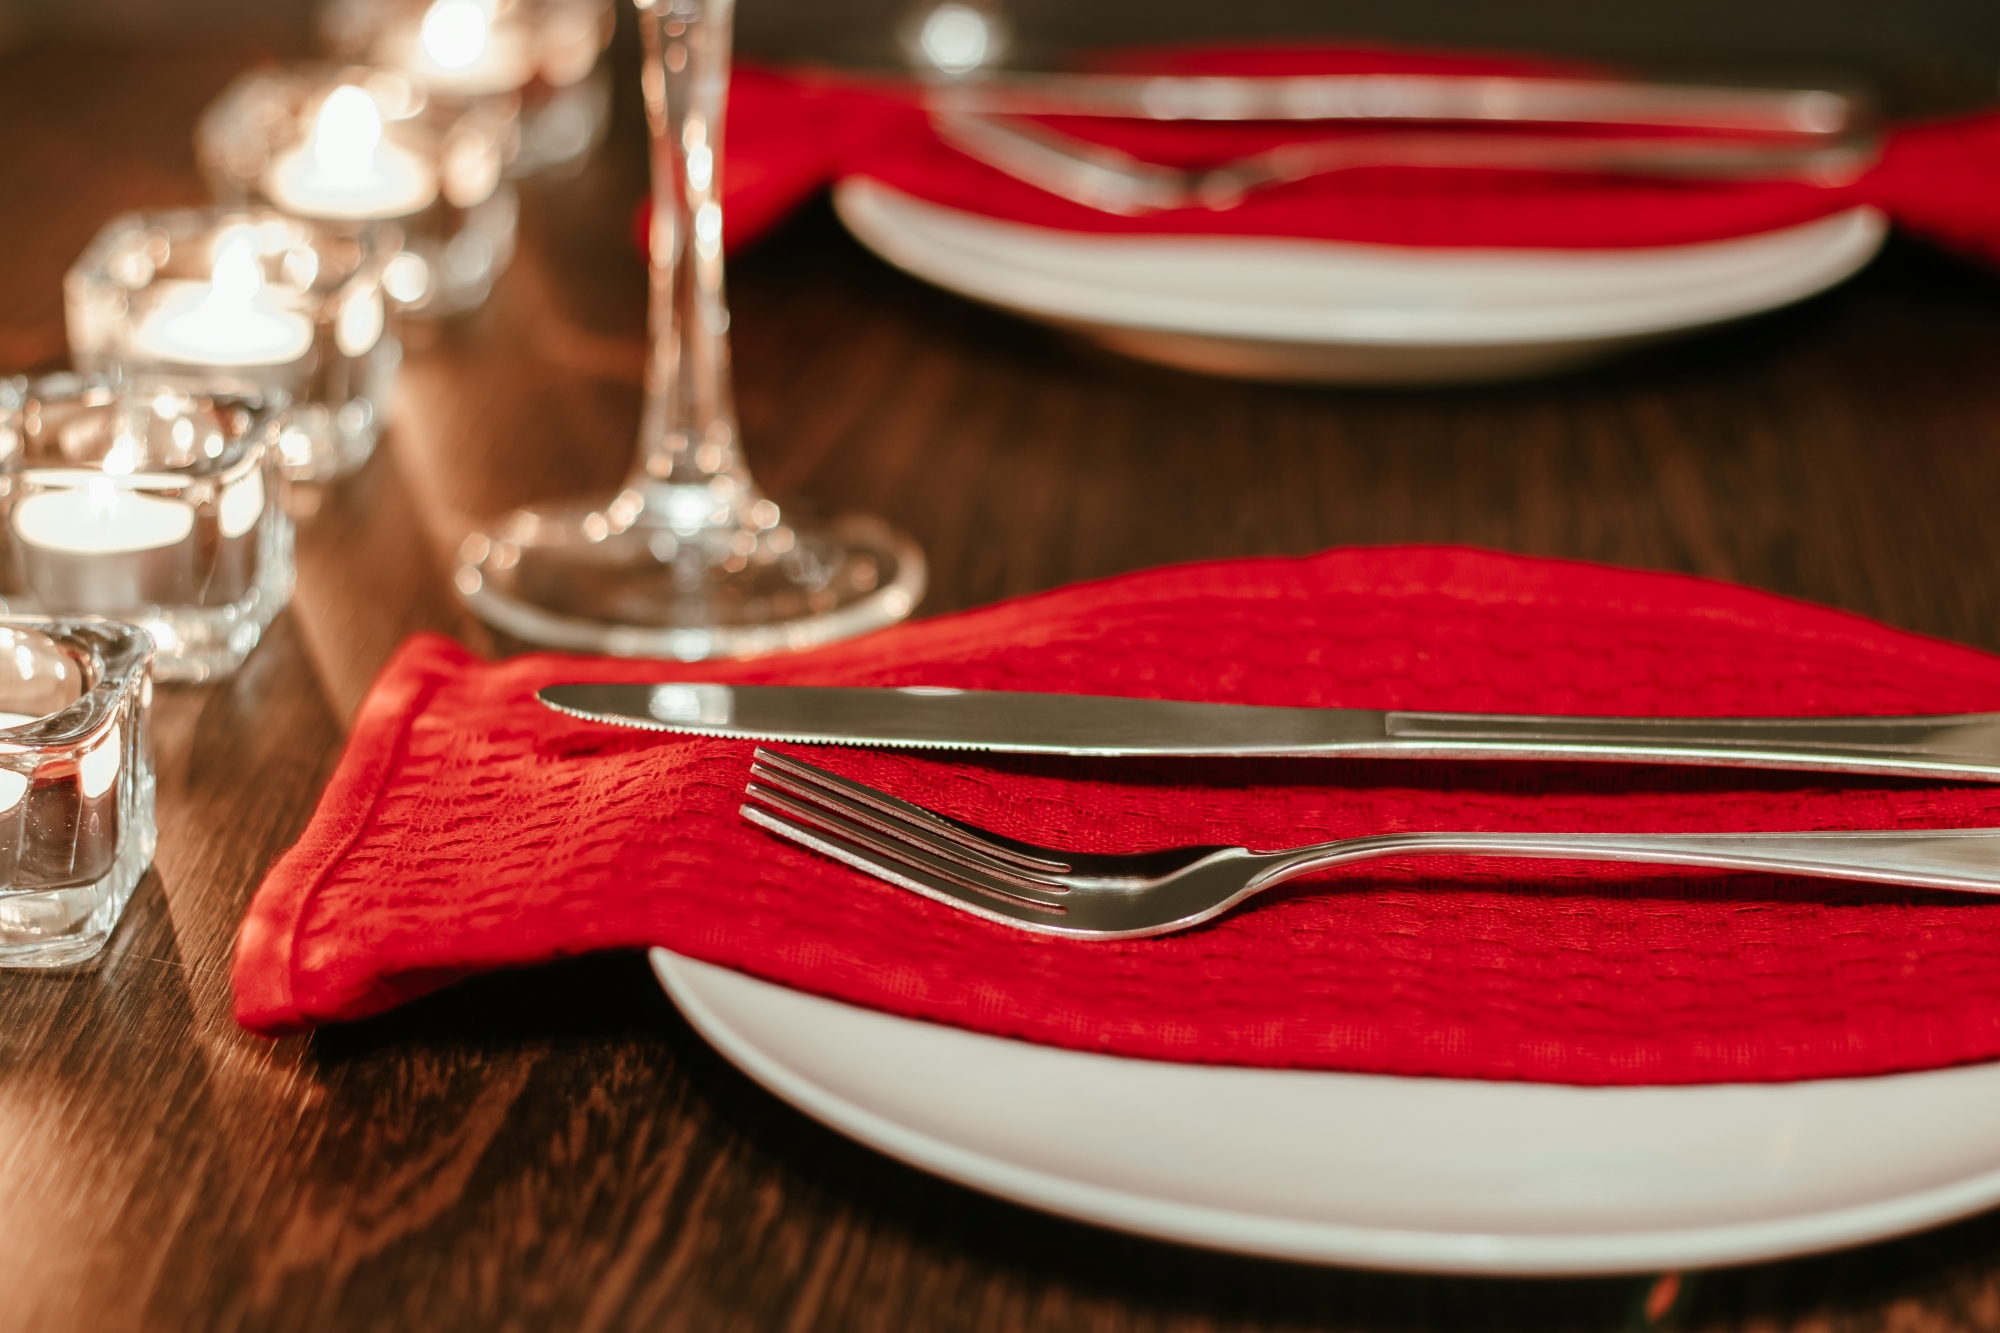 Boosting Restaurant Hygiene with Quality Linen Services